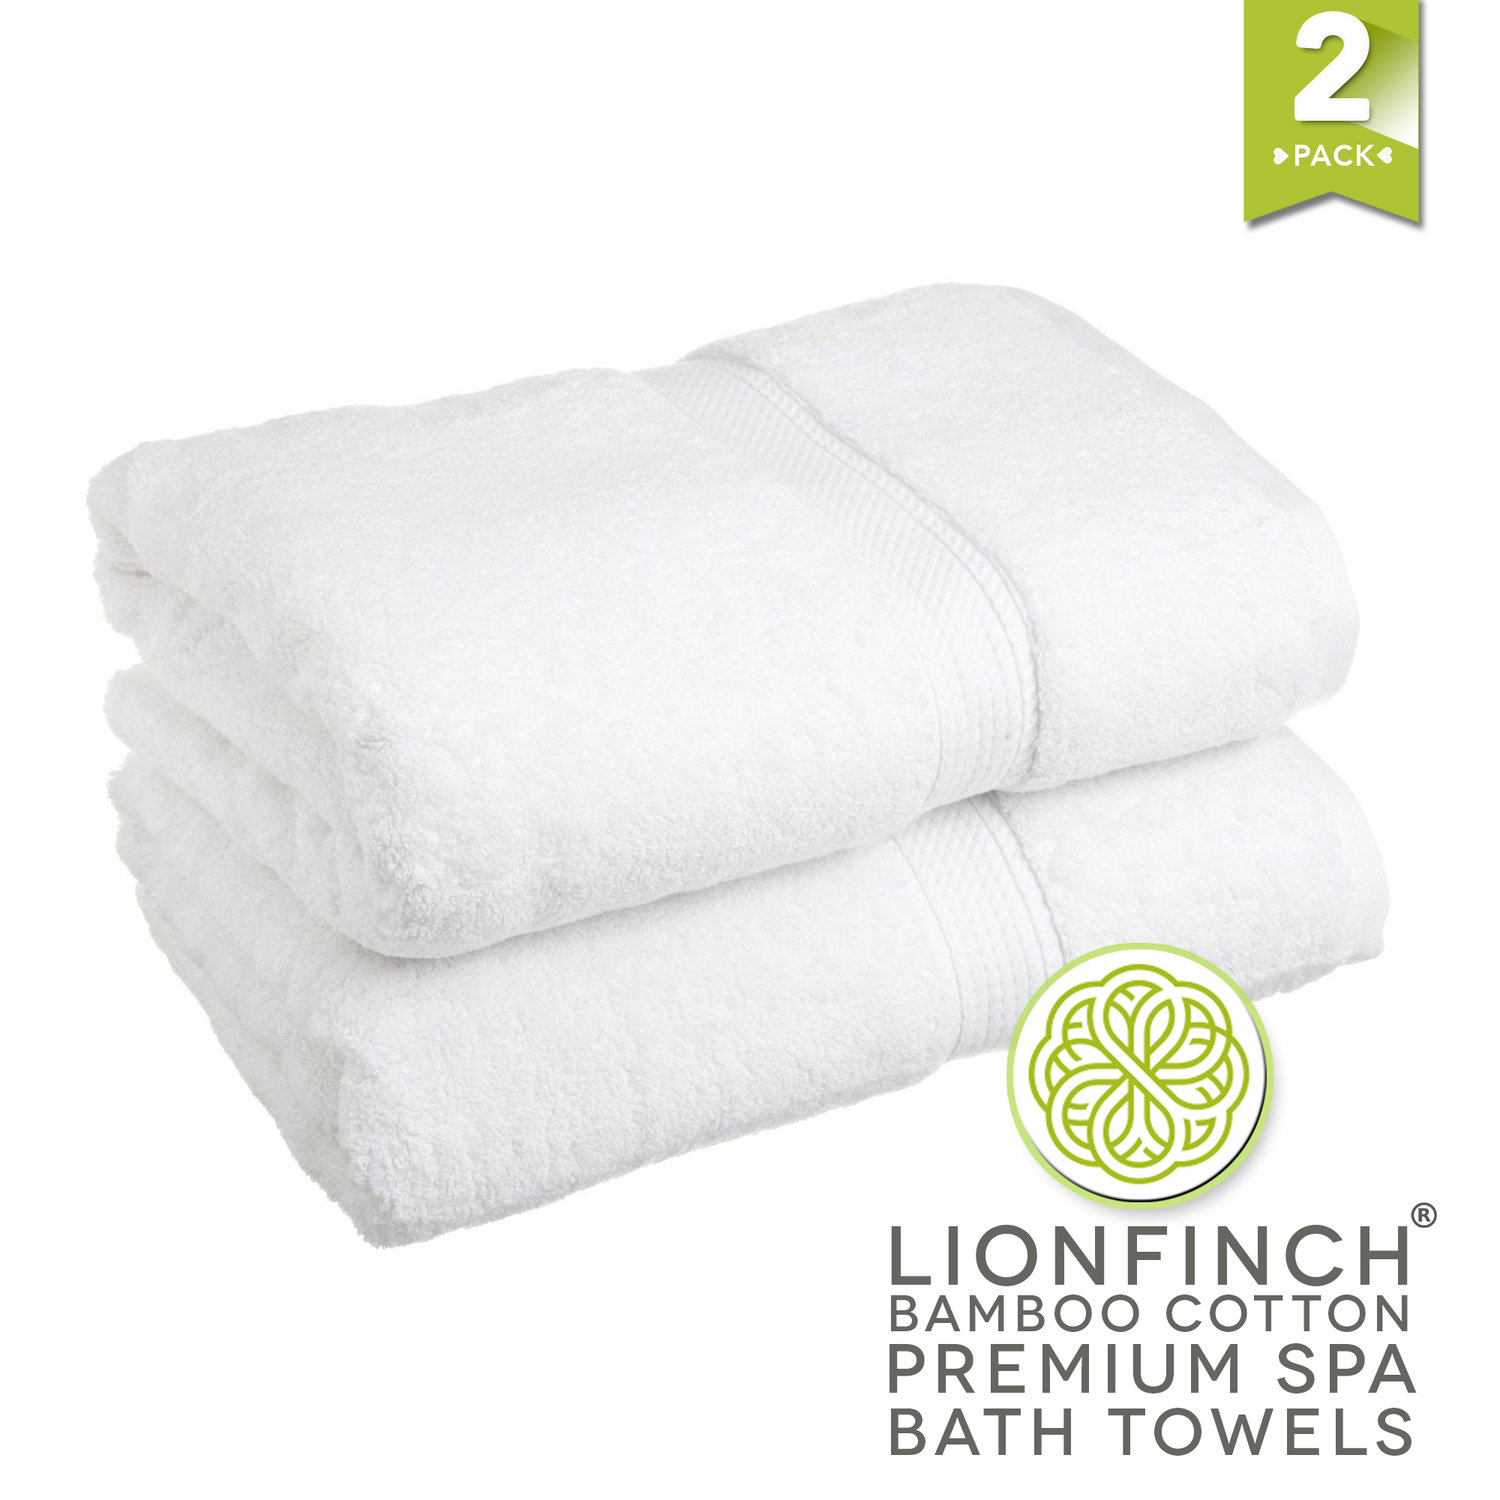 Luxury Spa Bath Towels. Bright White-Set of 2. Crafted from Premium Bamboo  and Combed Cotton. Ultra Soft and Ultra Absorbent. 70 Inches Long by 35  Inches Long. Doubles in Sizes After First